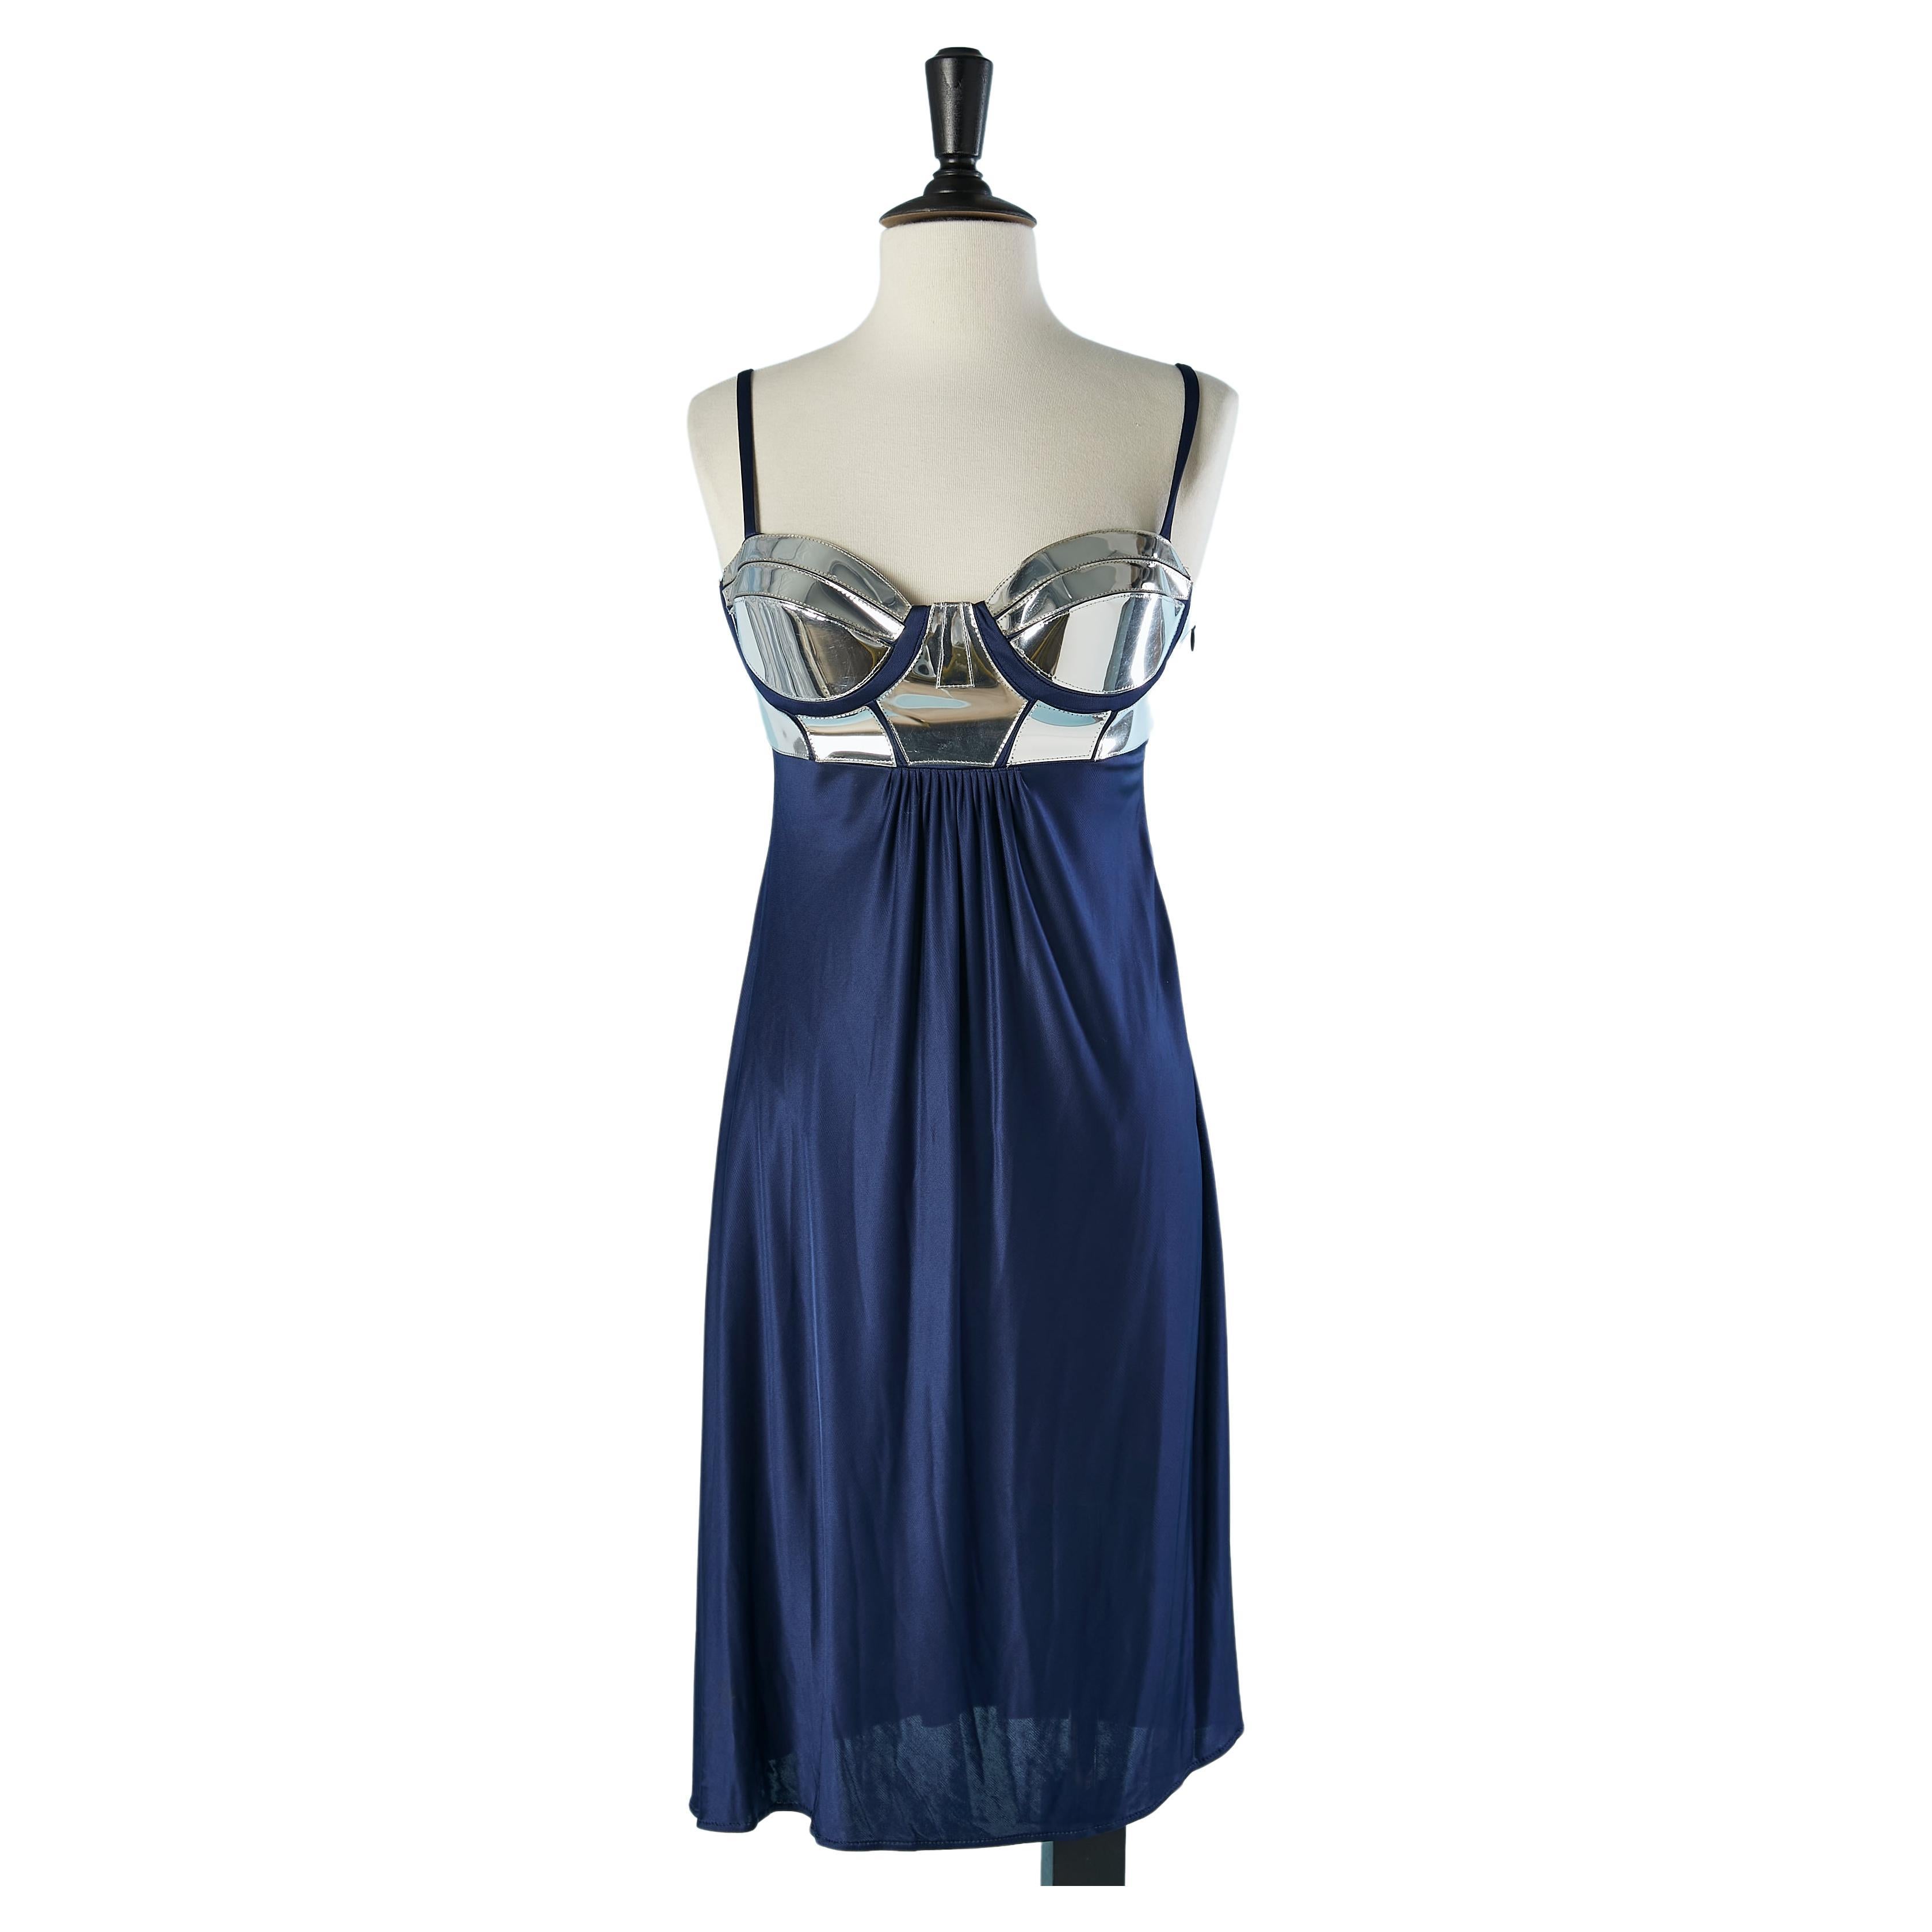  Cocktail dress in navy blue jersey and silver PVC bra VJC Versace  For Sale